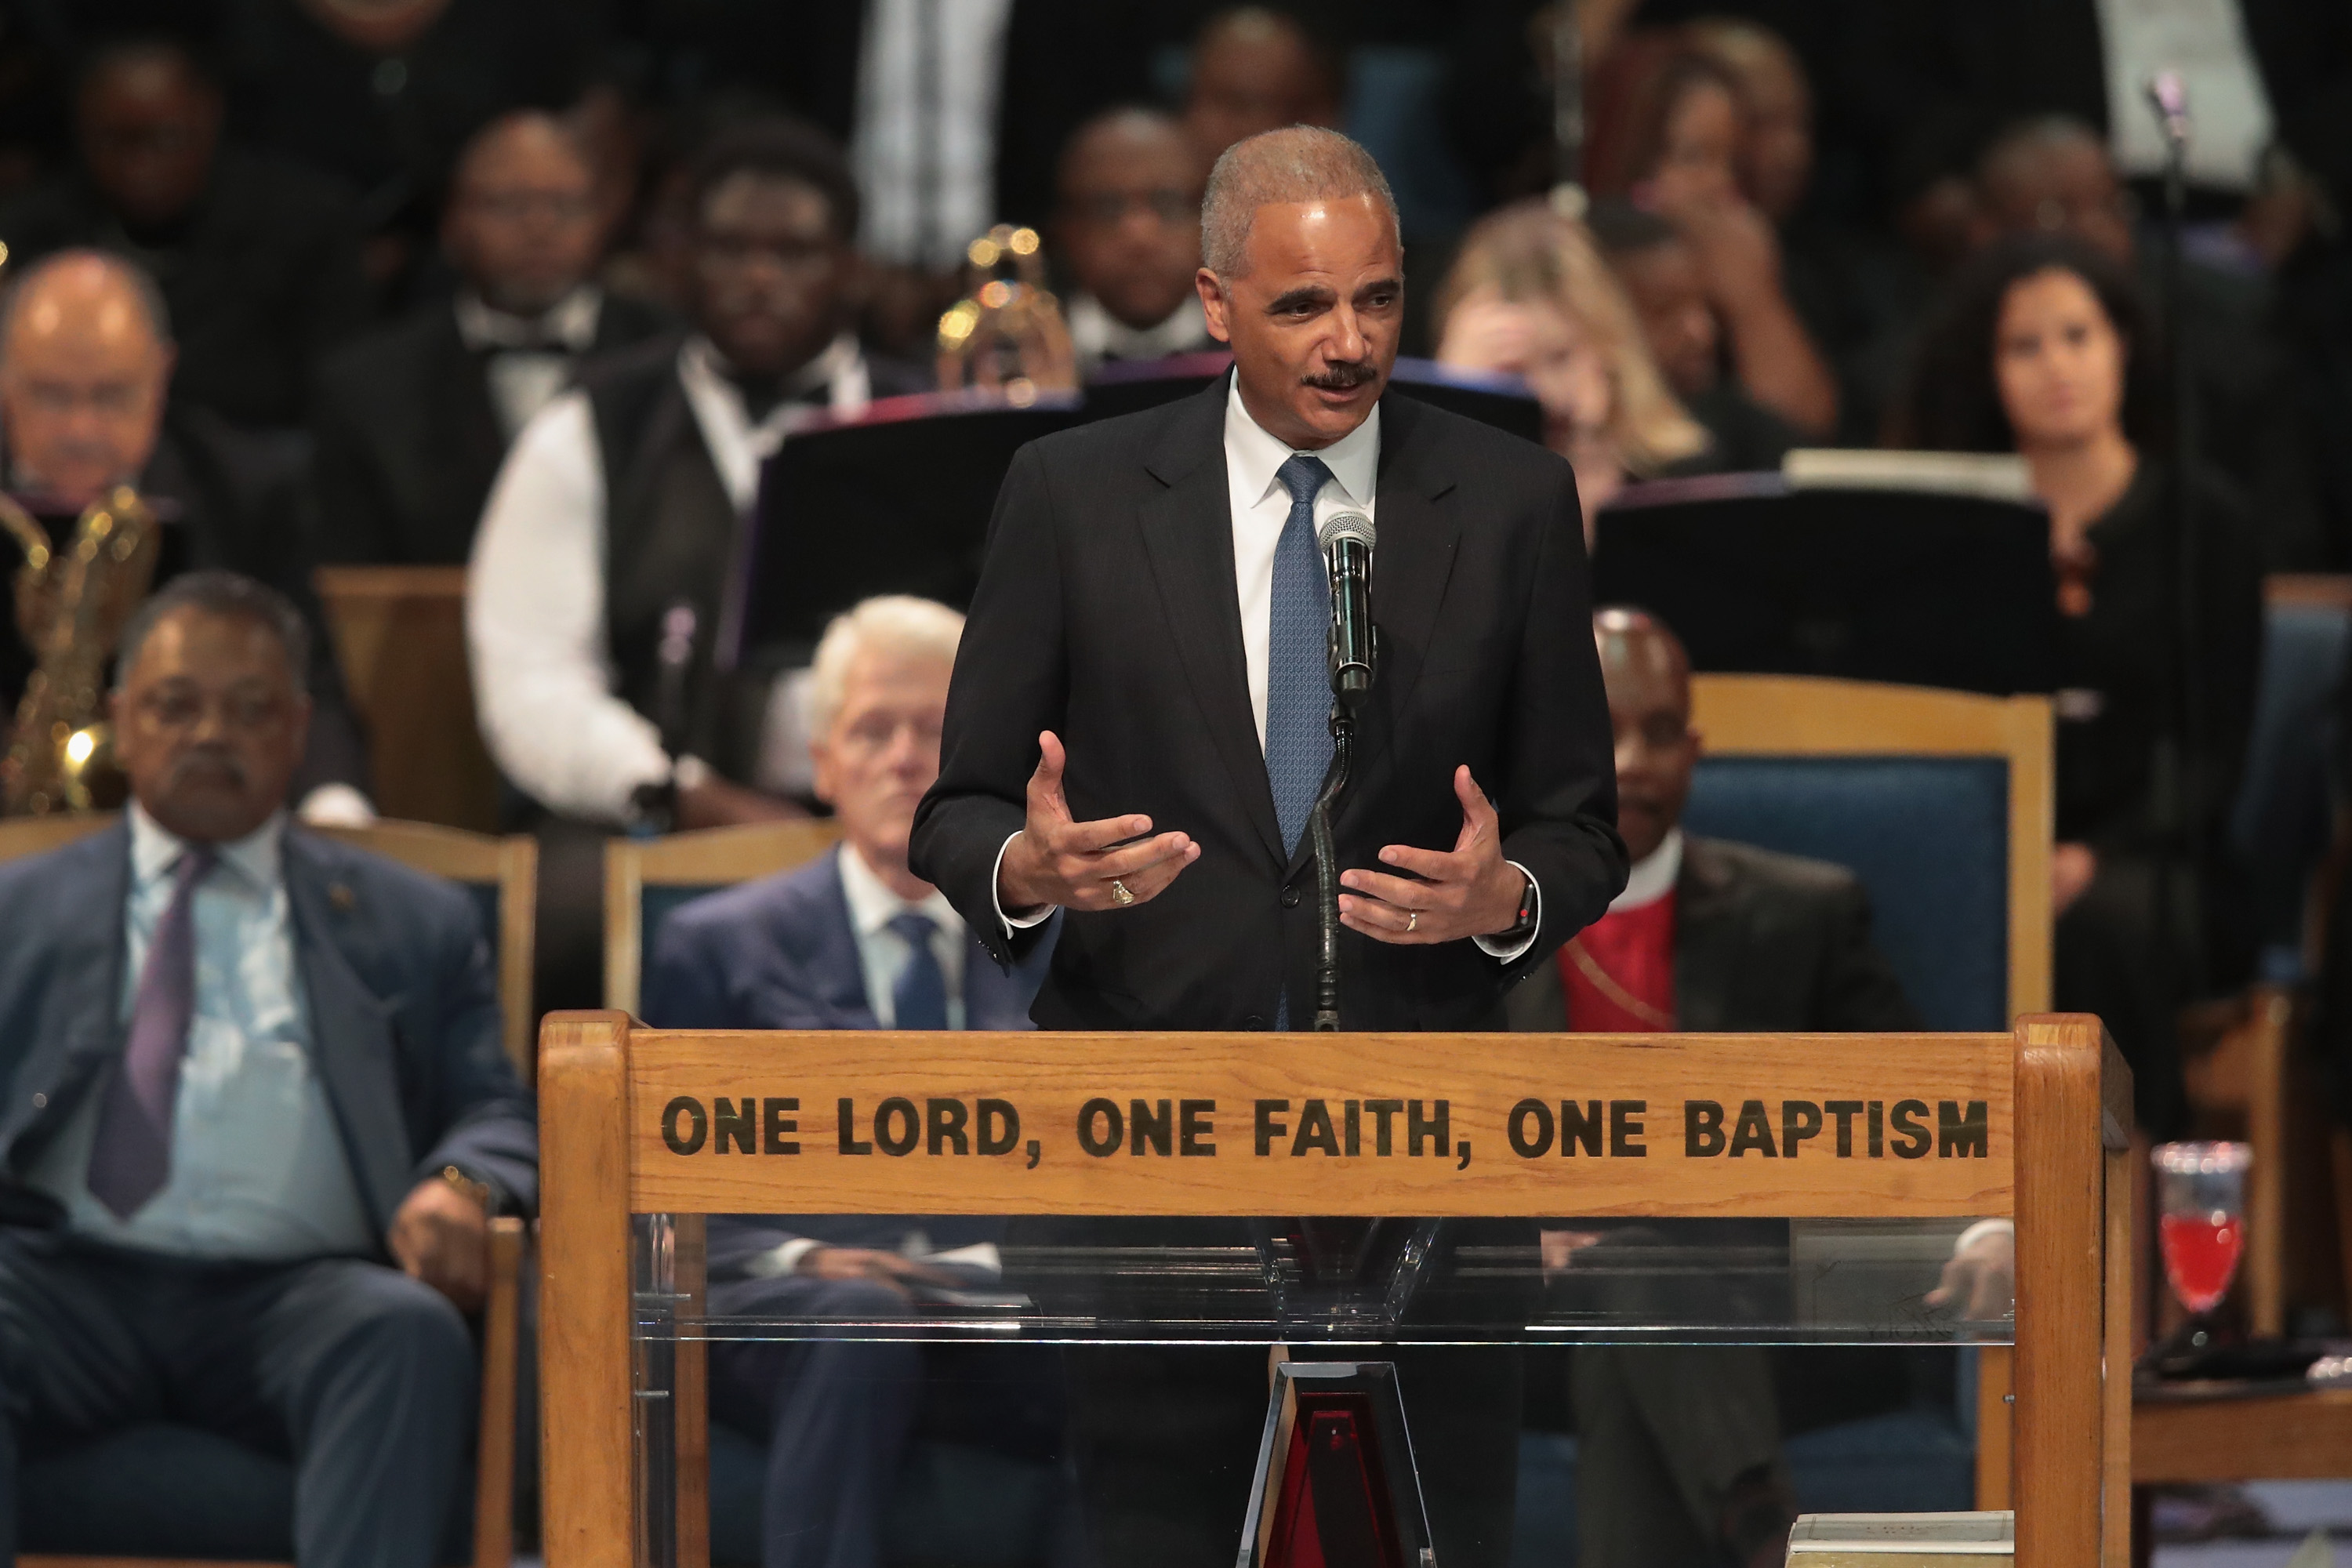 Former U.S. Attorney General Eric Holder speaks at the funeral for Aretha Franklin at the Greater Grace Temple on August 31, 2018 in Detroit, Michigan. (Photo by Scott Olson/Getty Images)